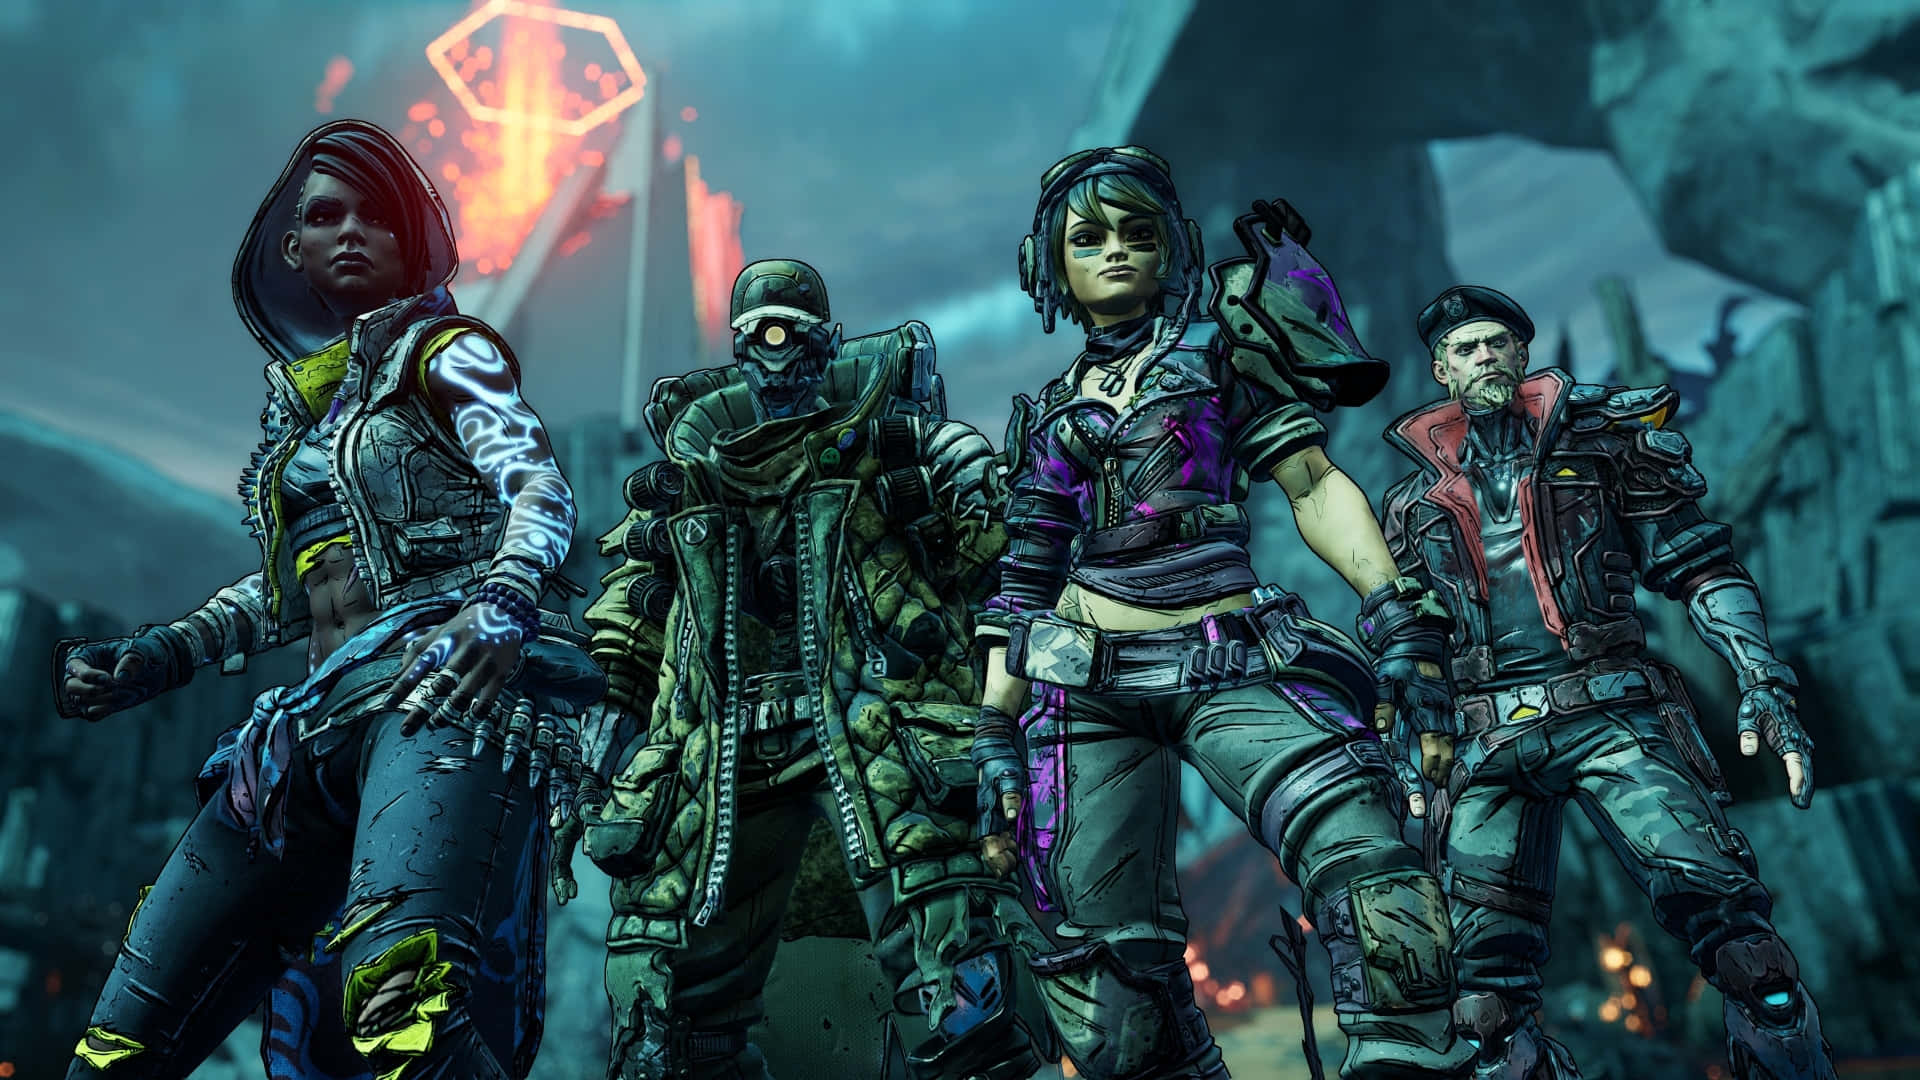 Step into Pandora and the Borderlands universe with Borderlands 3